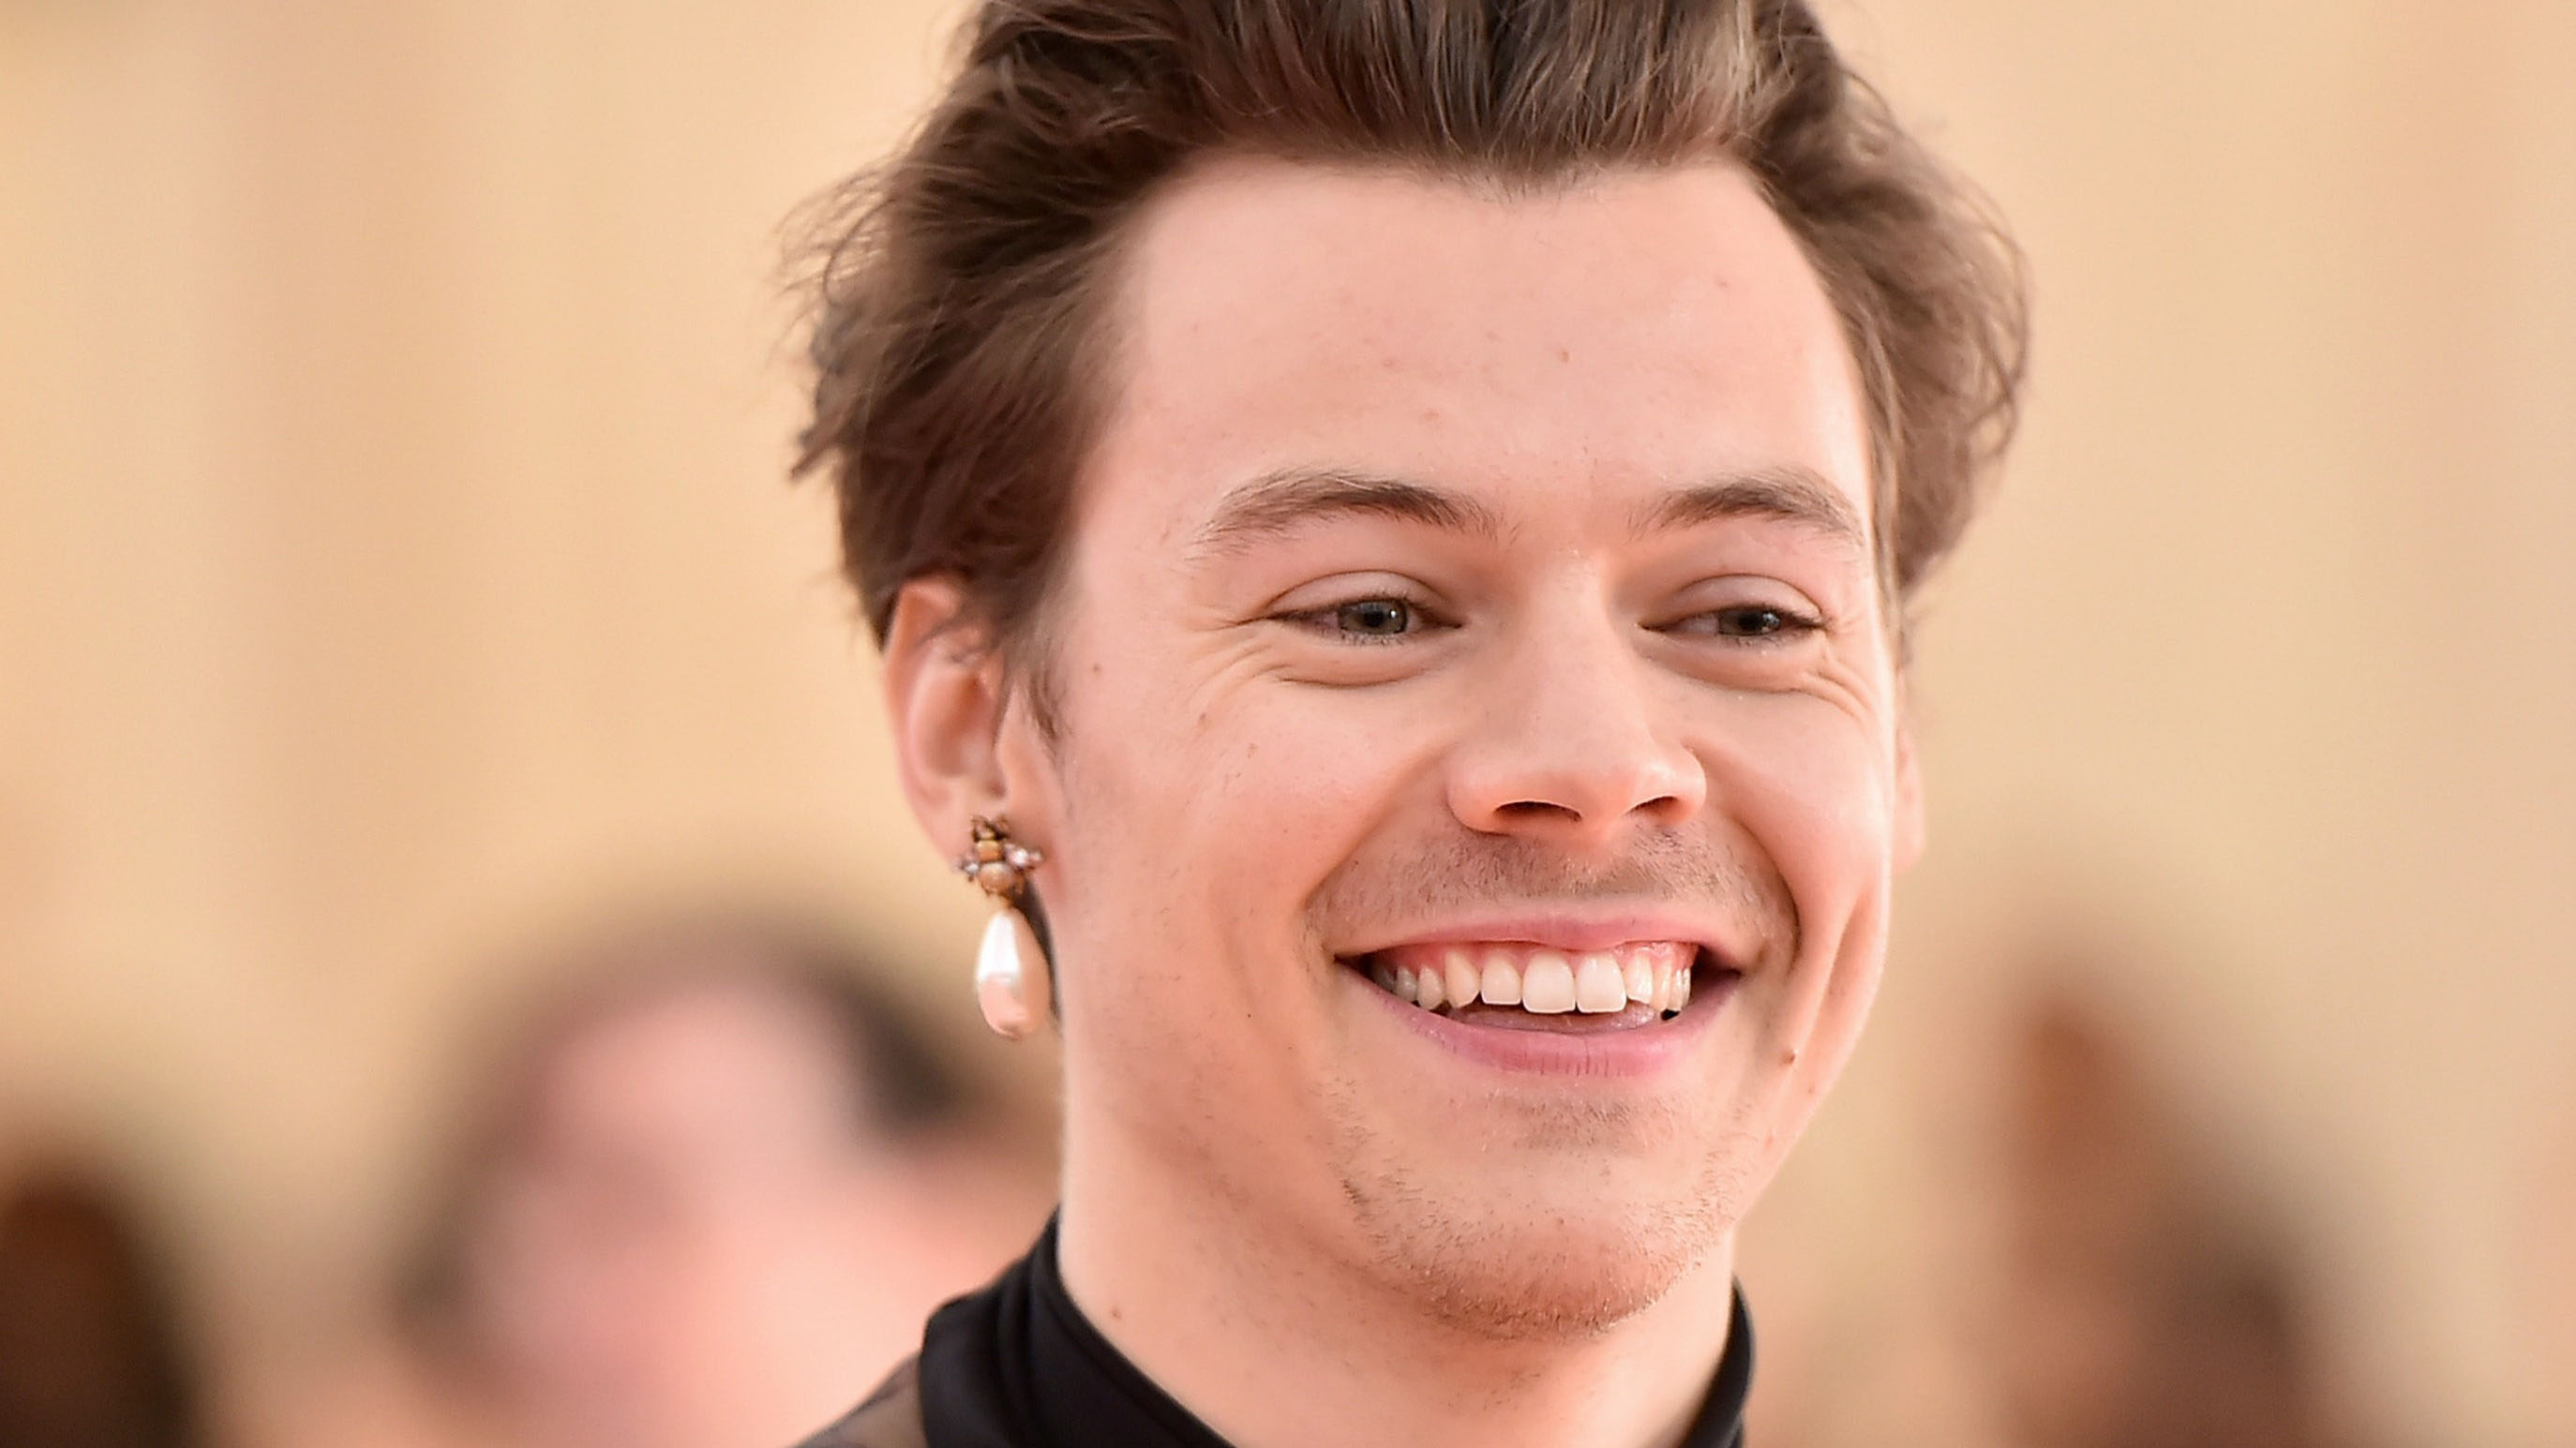 Harry Edward Styles (born 1 February 1994) is an English singer, songwriter, and actor. His musical career began in 2010 as a solo contestant on the B...